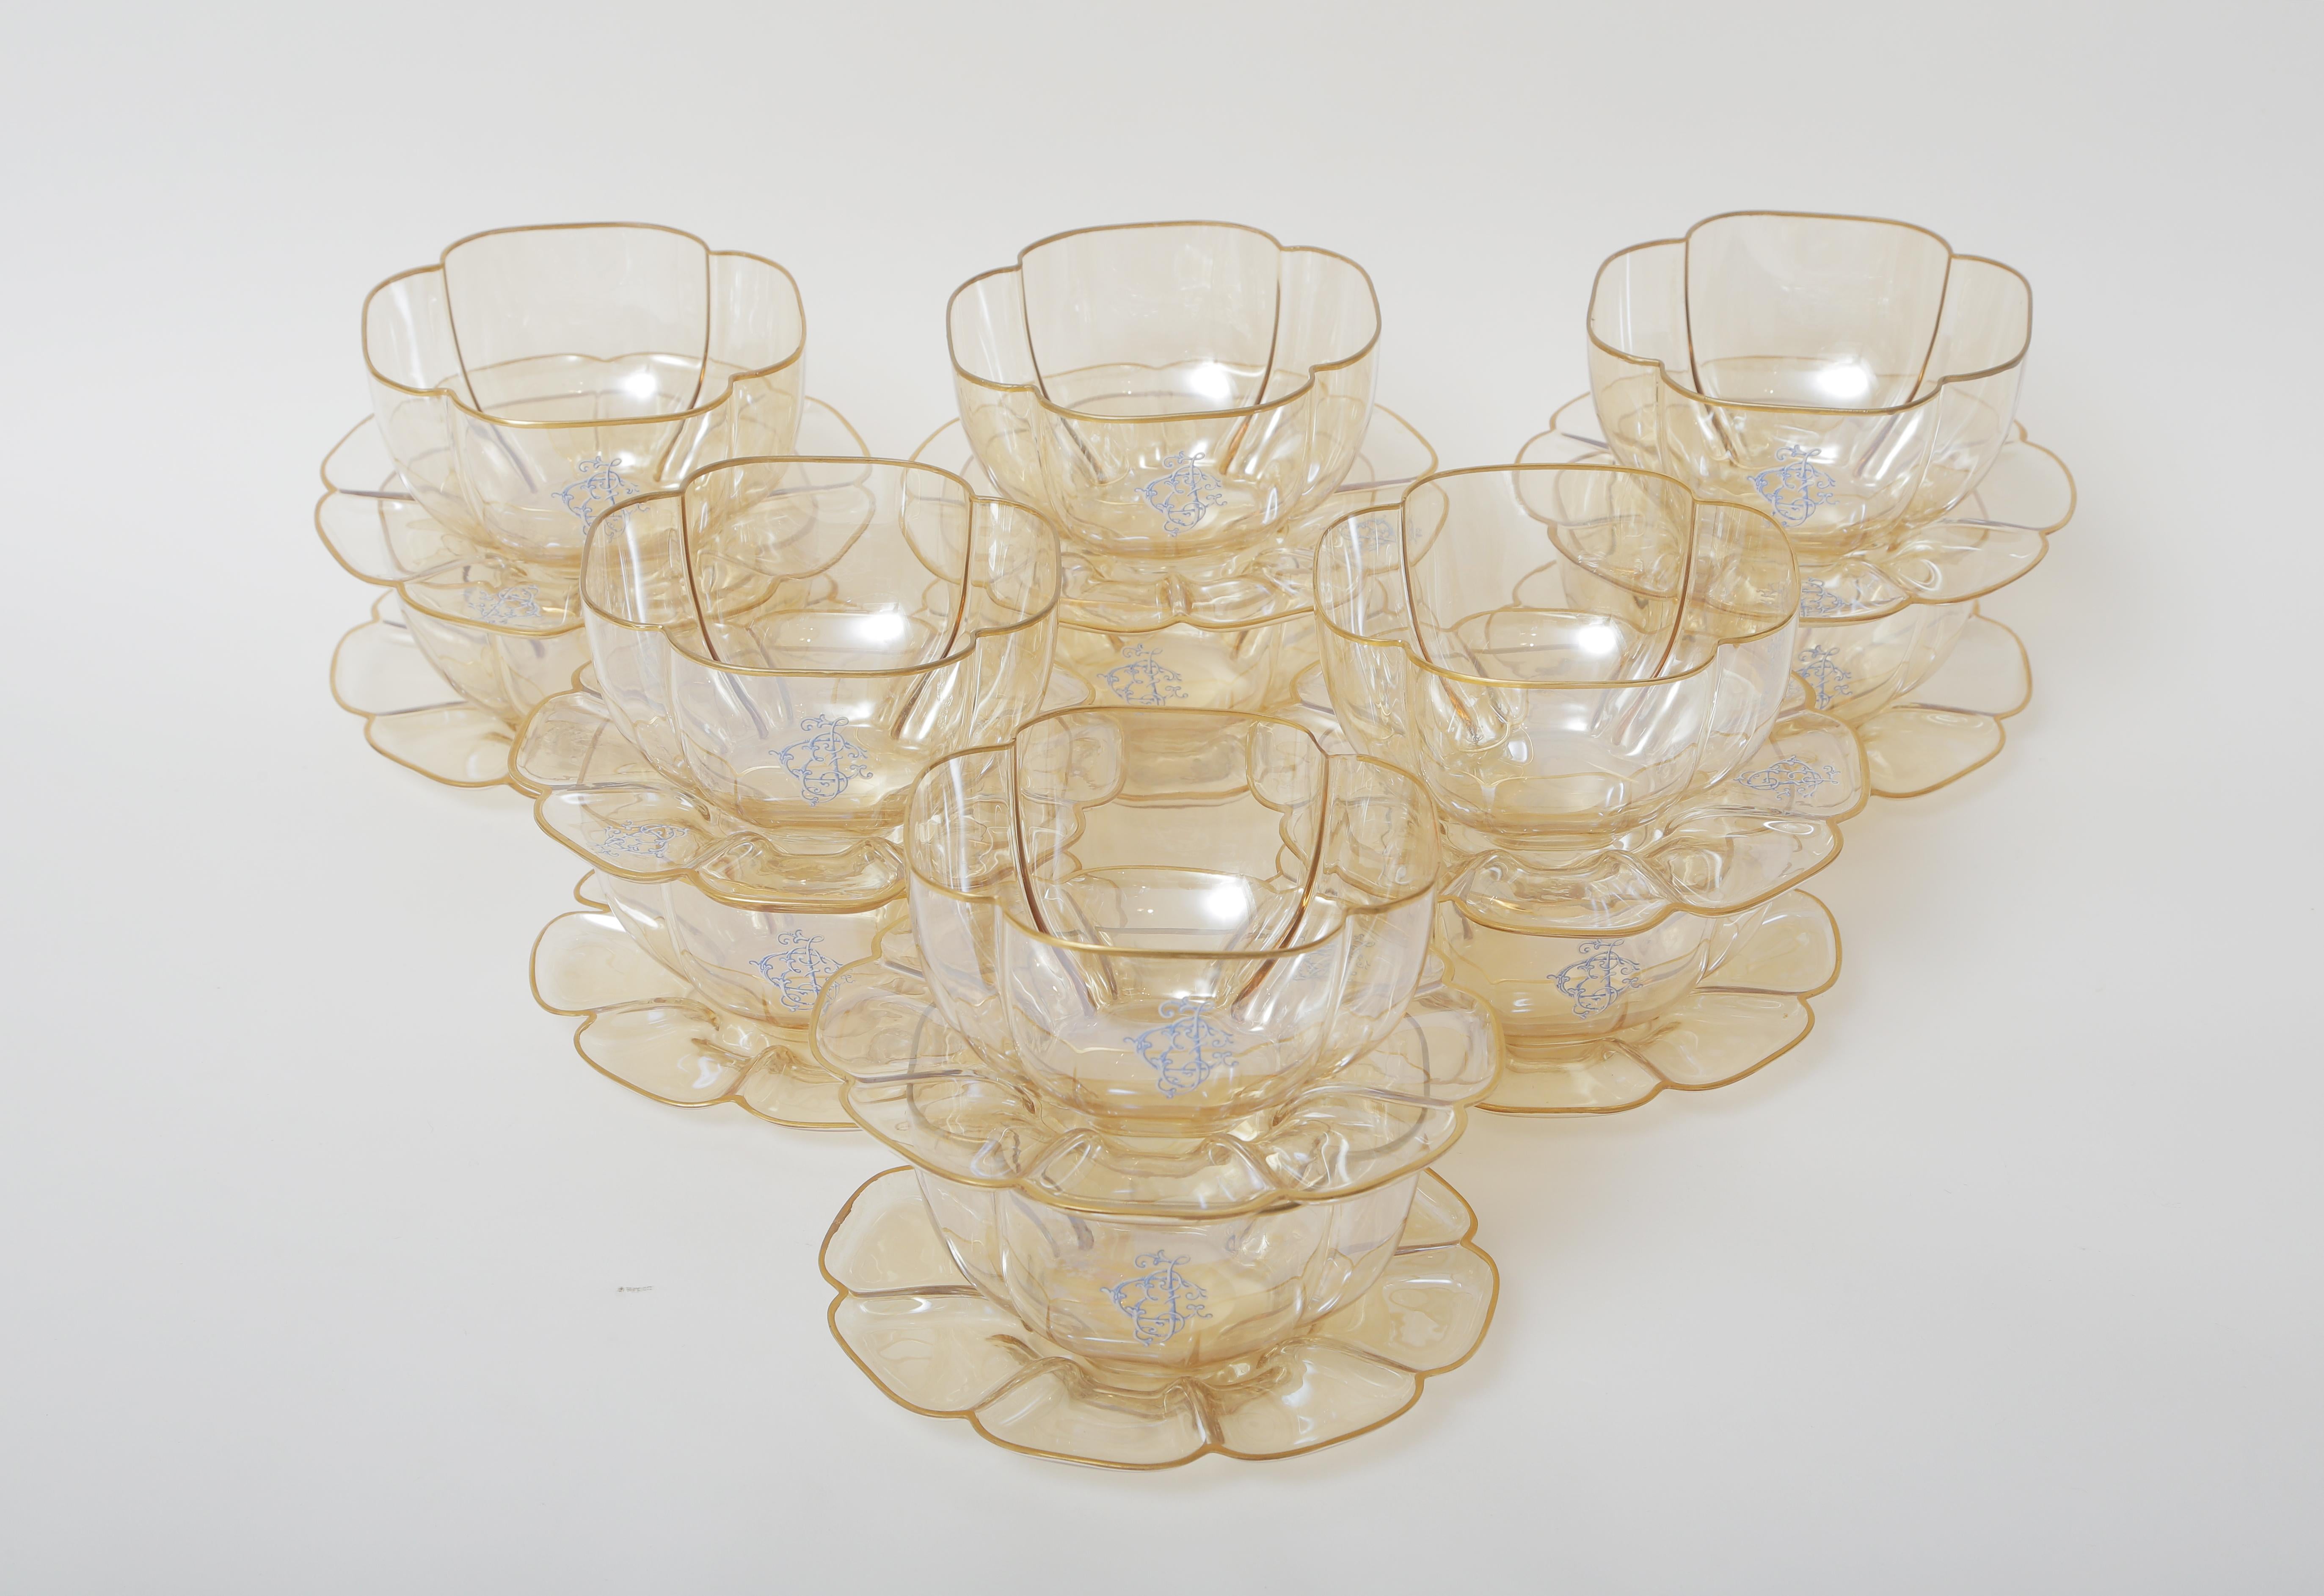 Czech 12 Antique Crystal Dessert Bowls with 12 Plates, 19th Century Moser, 24 Pieces